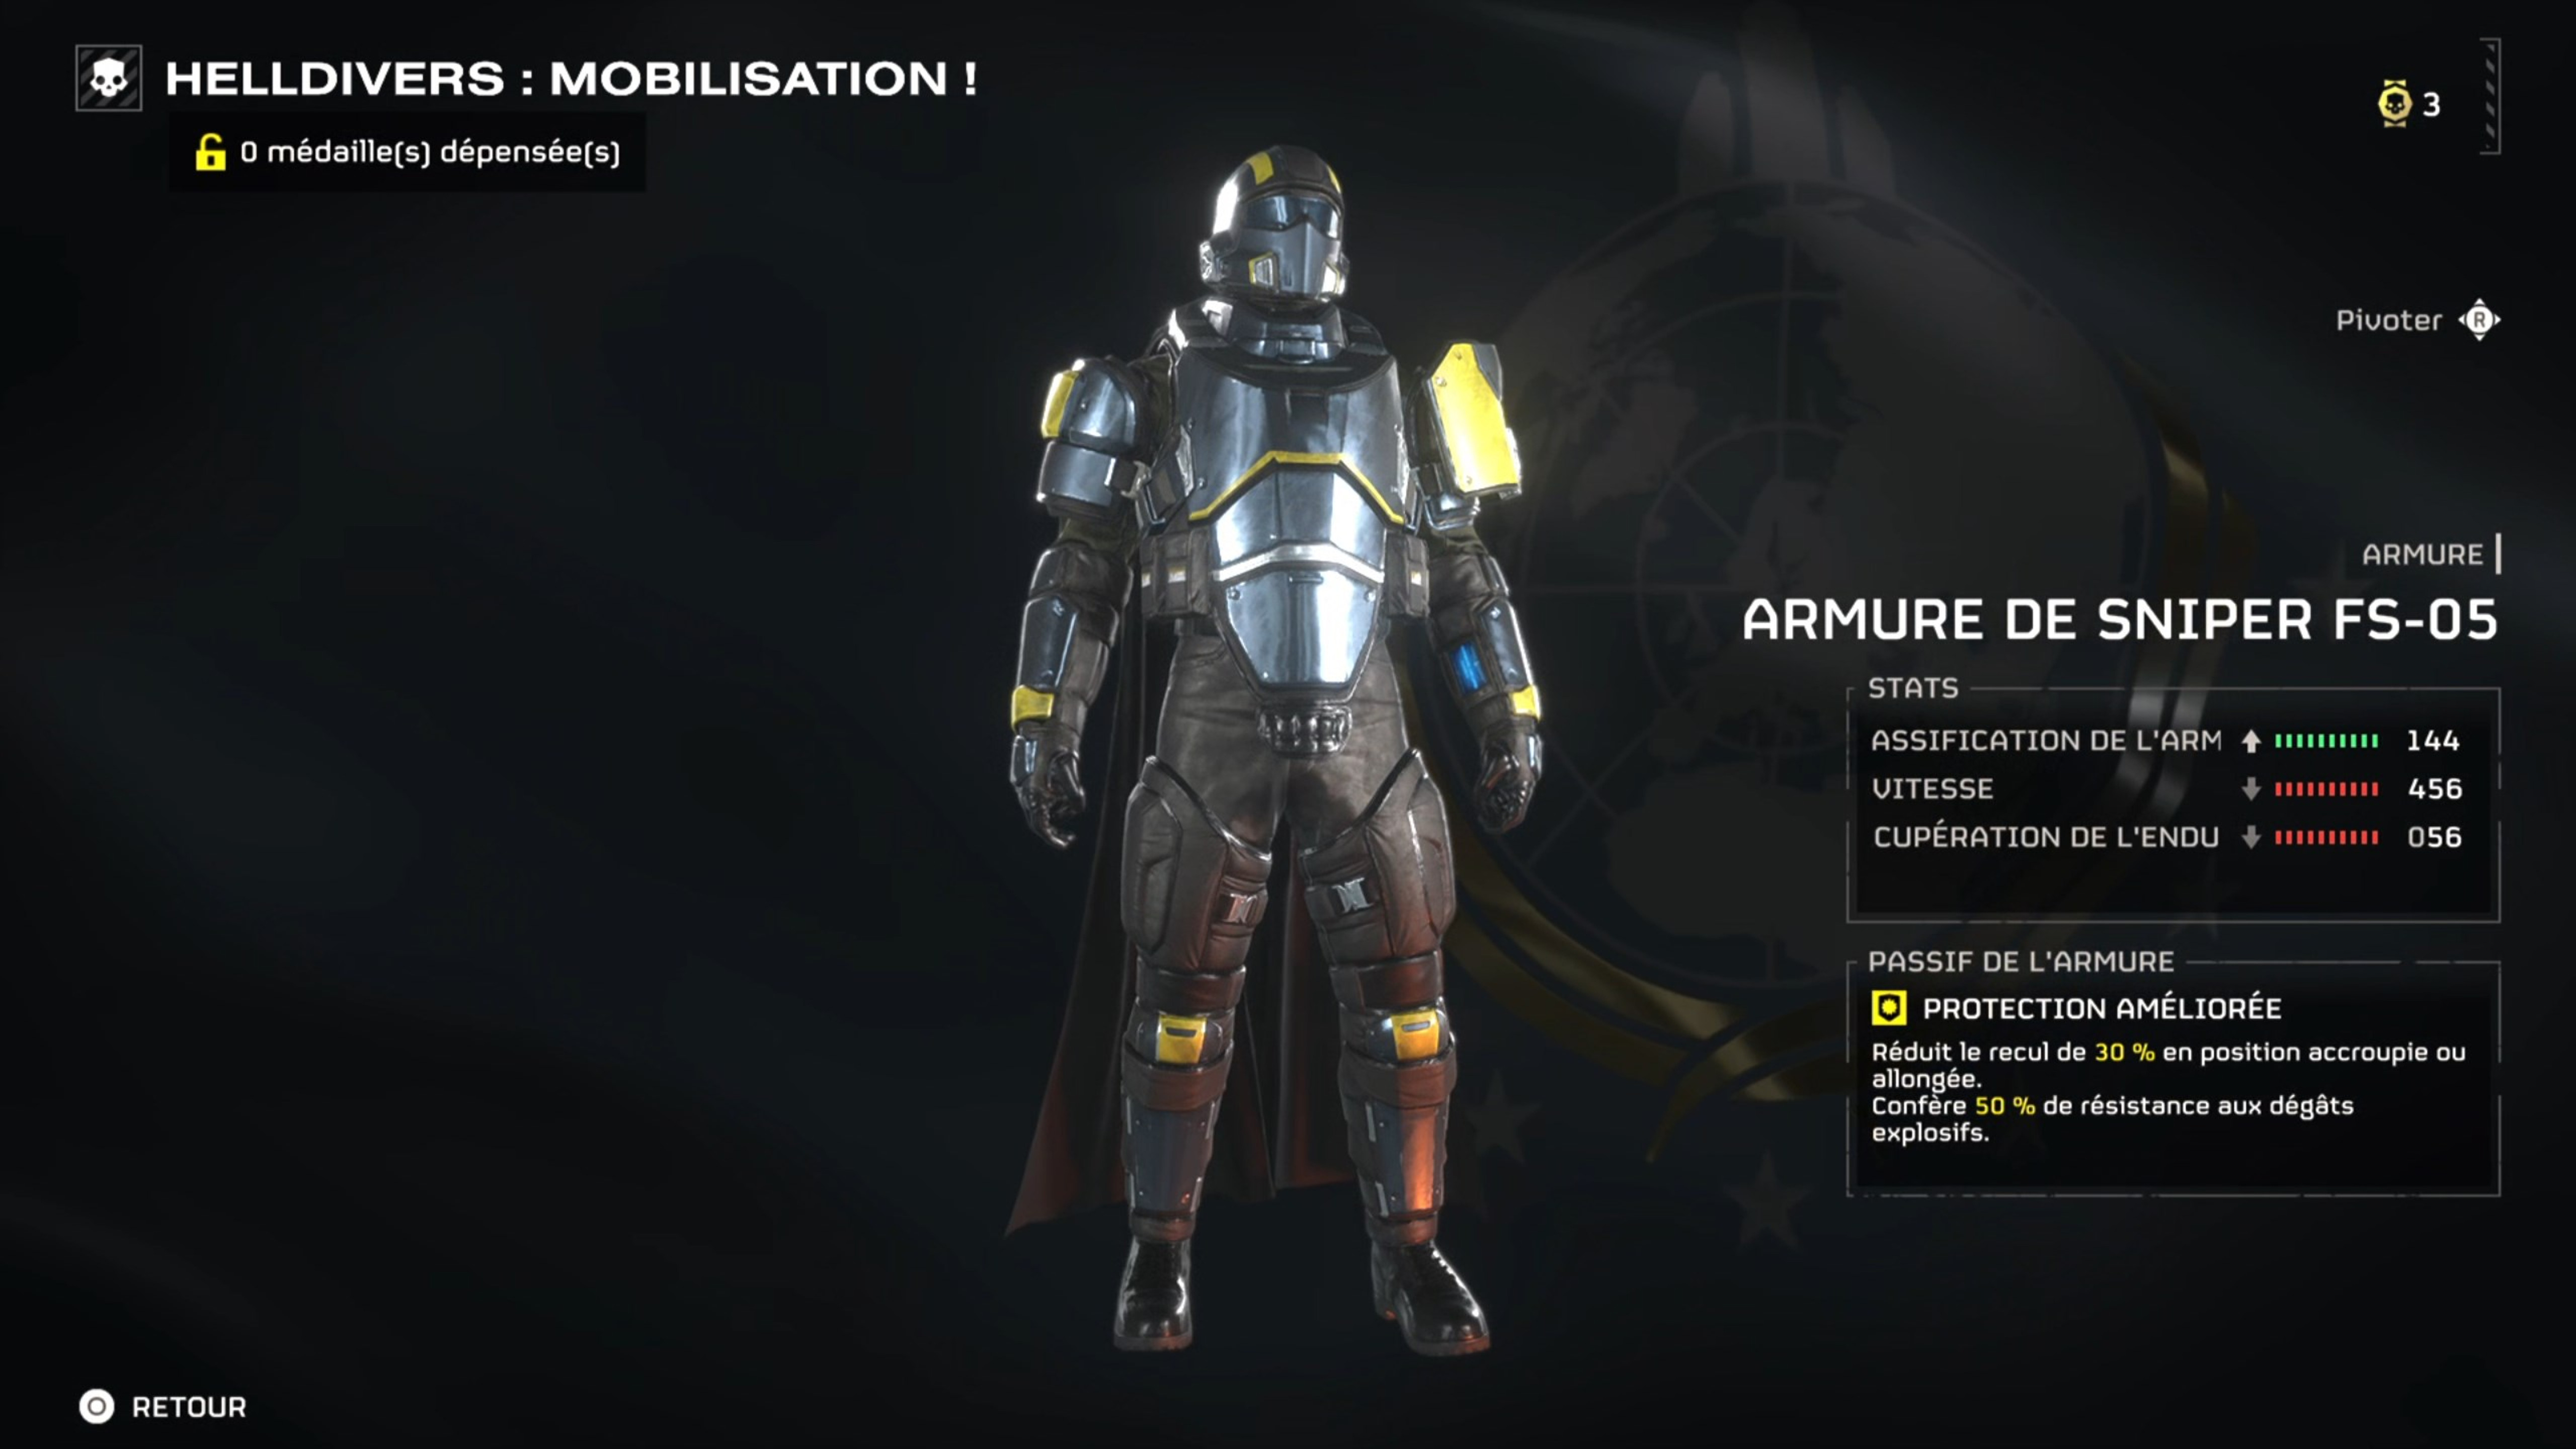 protection-amelioree-passif-helldivers-2